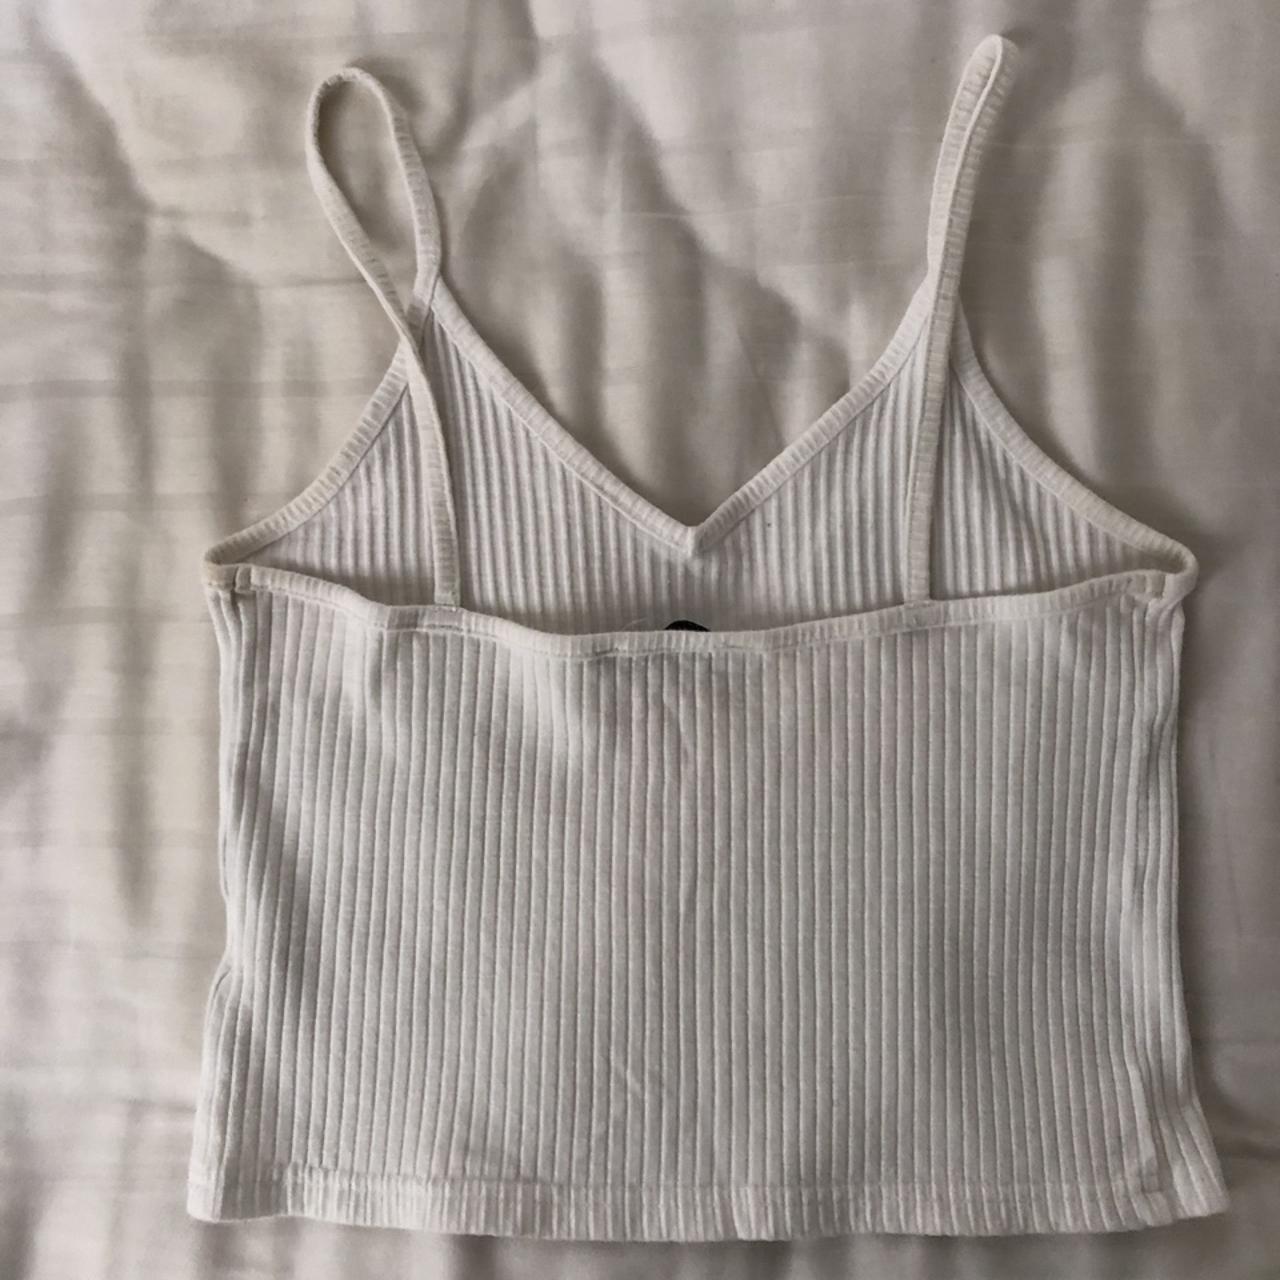 White Basic Singlet 🤍 in mint condition, great... - Depop